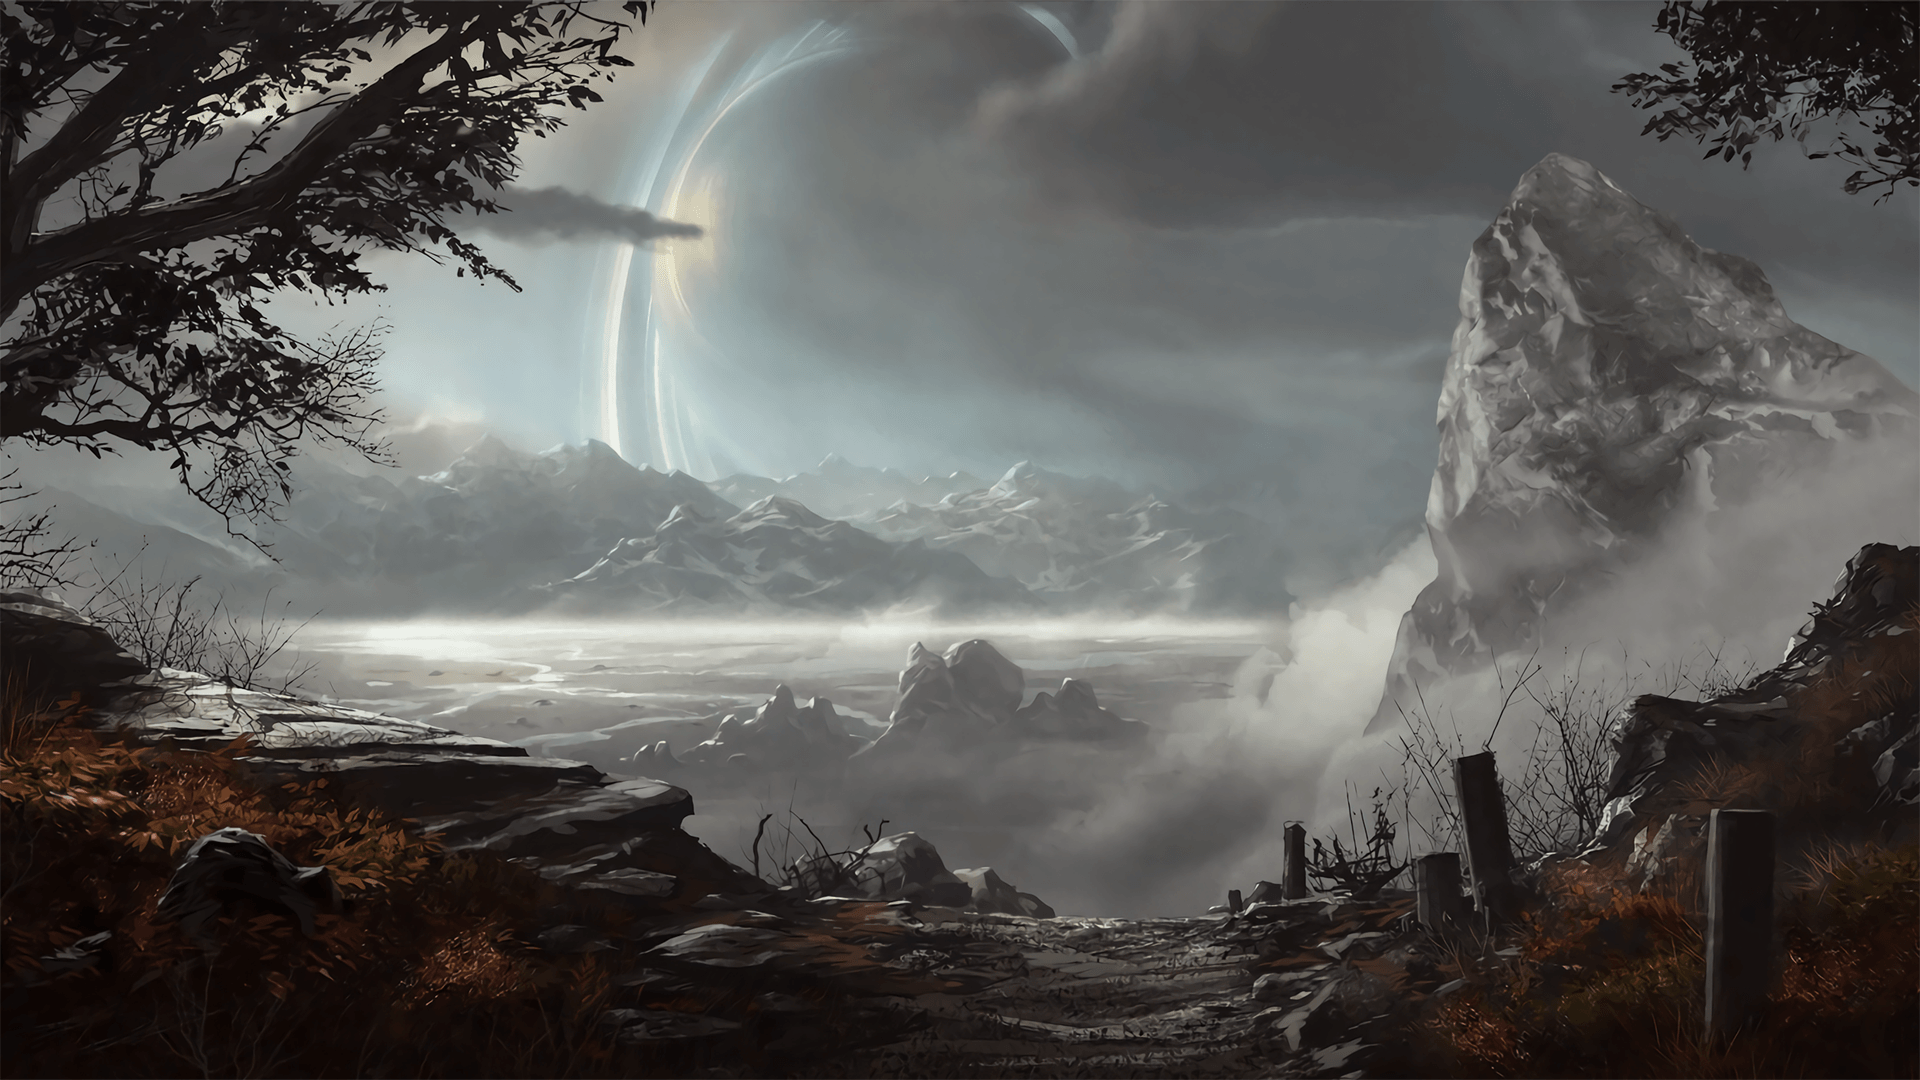 Xbox Game Studios Halo Science Fiction Video Games Video Game Art Landscape Sky Bungie Halo Reach 1920x1080